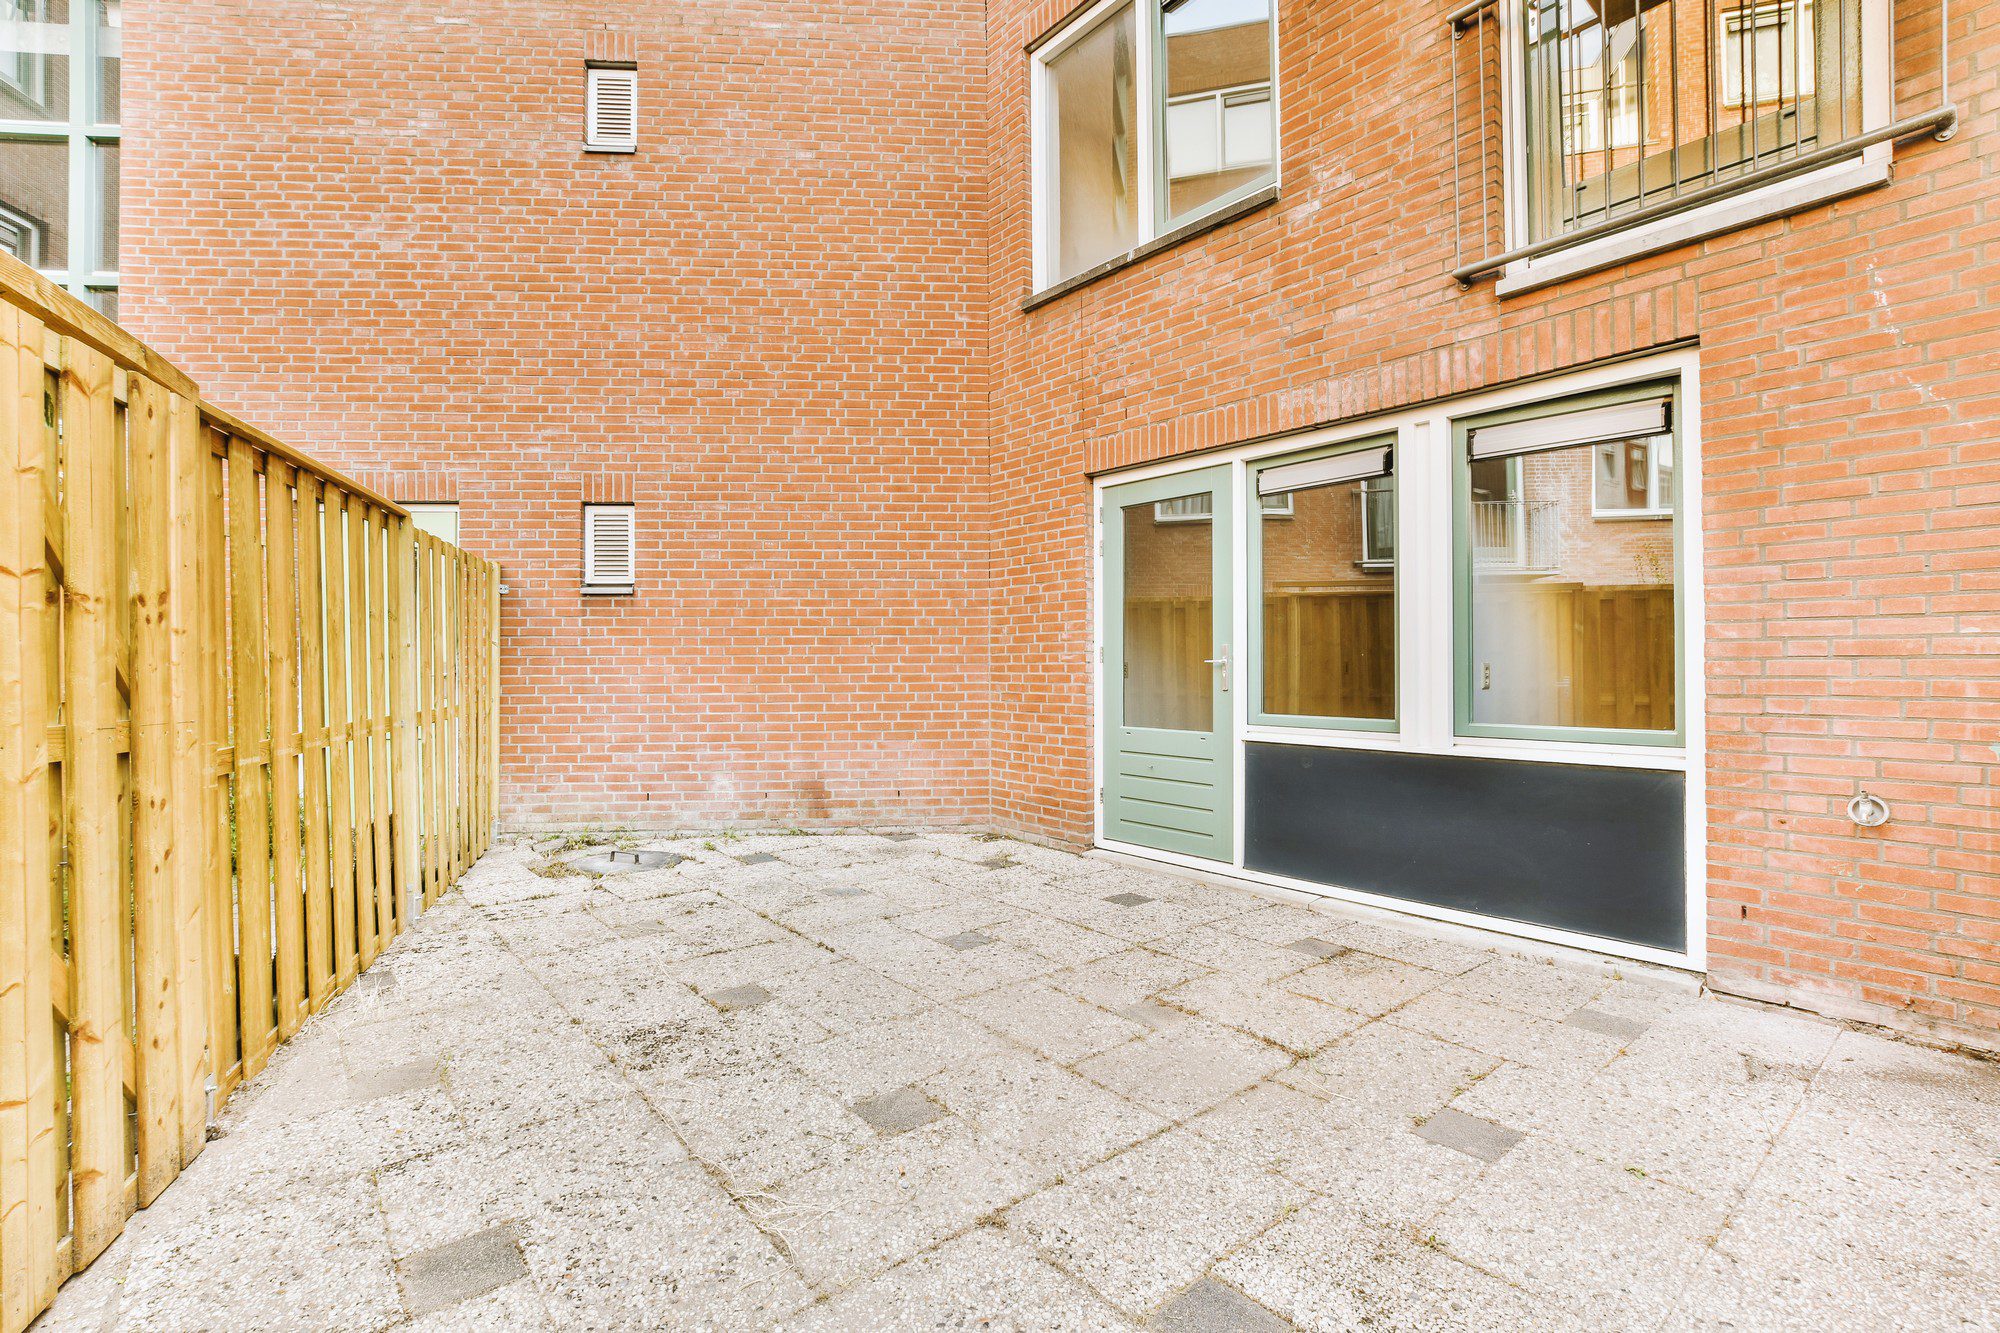 The image shows an outdoor area of a building, likely a small backyard or patio. There is a red brick wall with a few ventilation grates and windows, one of which is larger and leads in with a light green door. The ground is covered with concrete paving stones with small patches of grass or moss indicating some wear or lack of maintenance. To the left, there is a wooden fence that seems to provide a boundary for the space. The sky is not visible in the image, and the setting suggests a typical urban or suburban residence.